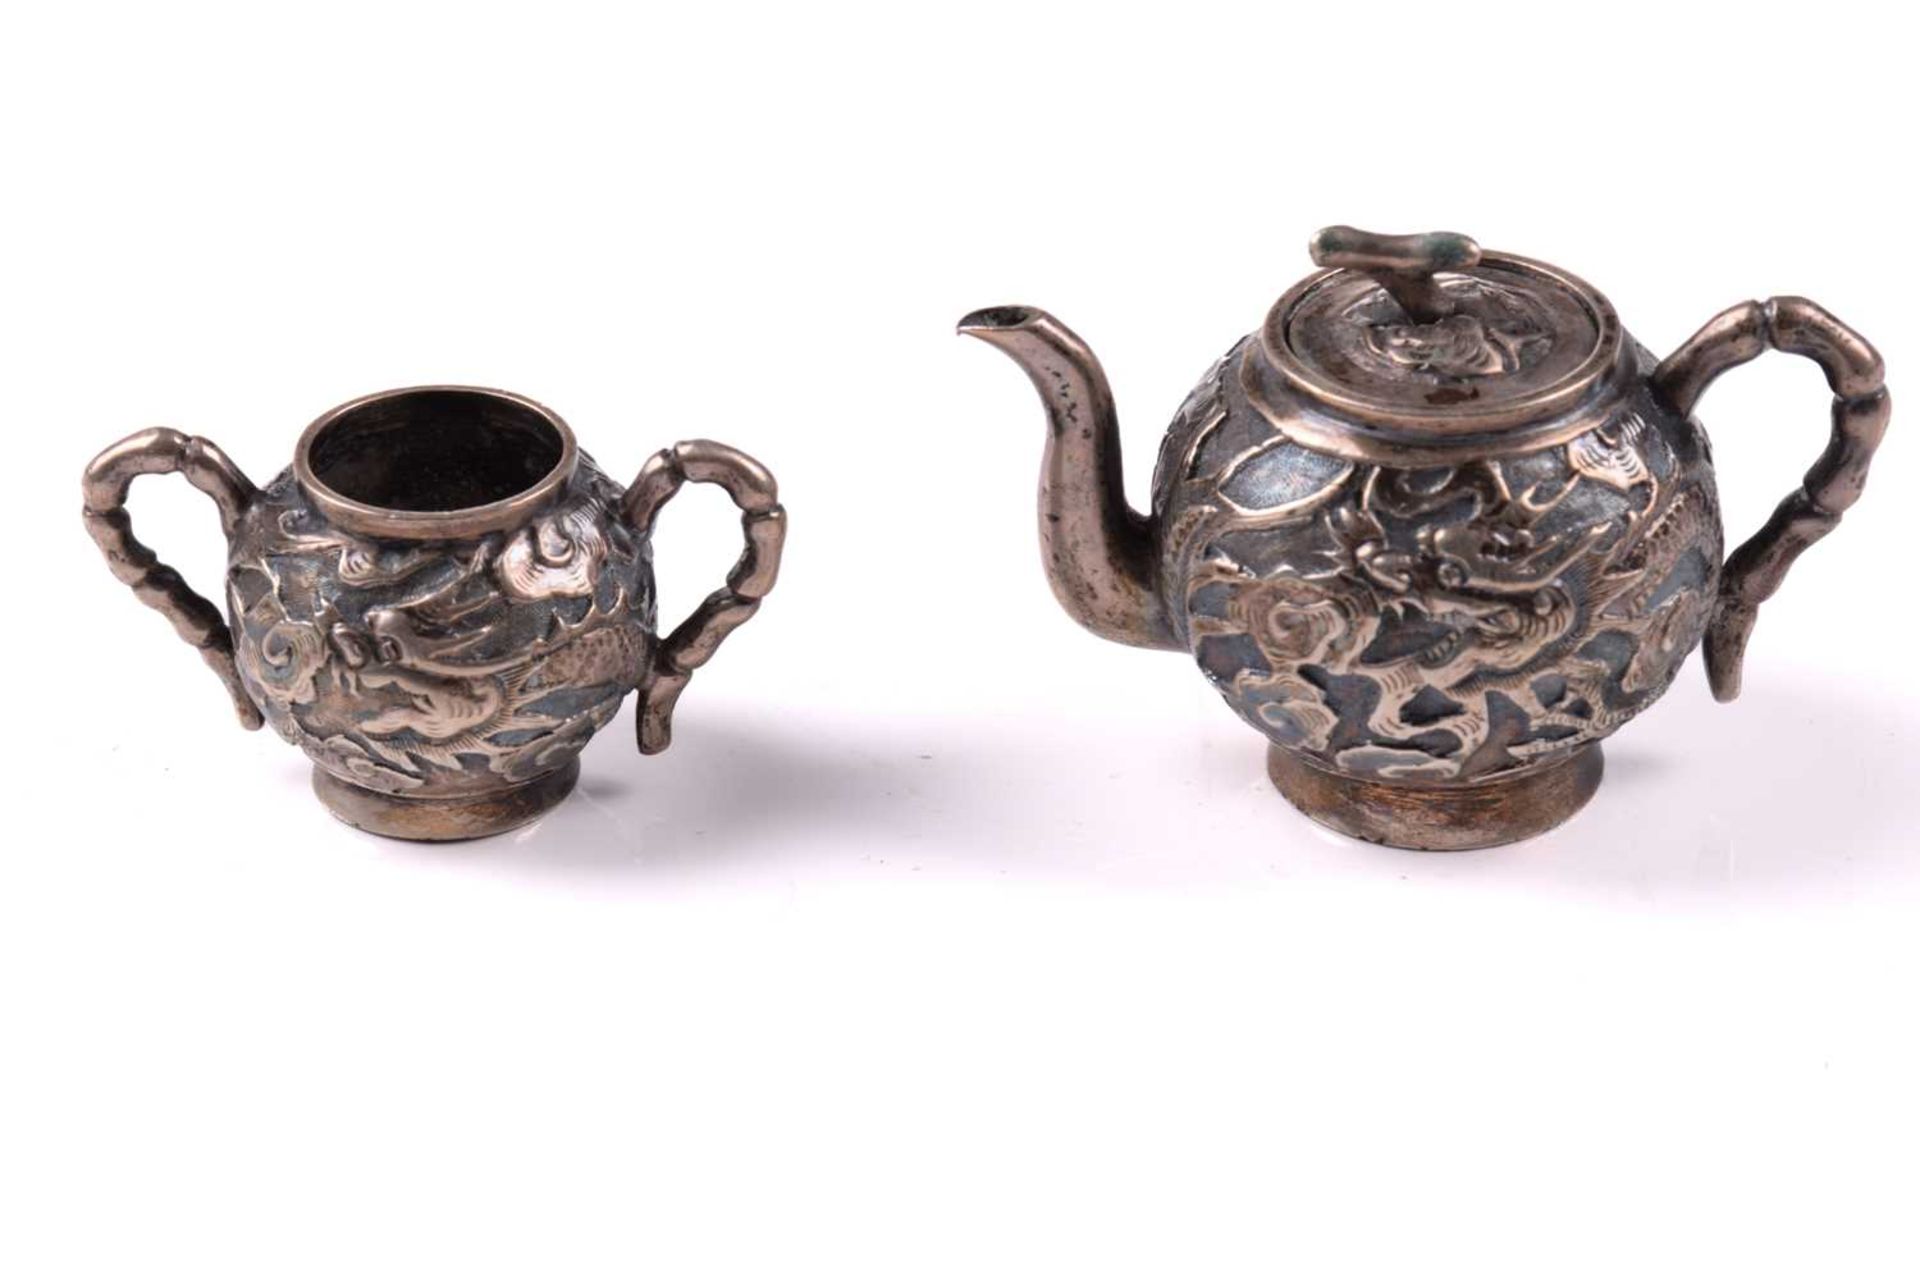 A Chinese miniature silver teapot and sugar bowl by Tuck Chang, each piece decorated with a dragon - Image 5 of 7